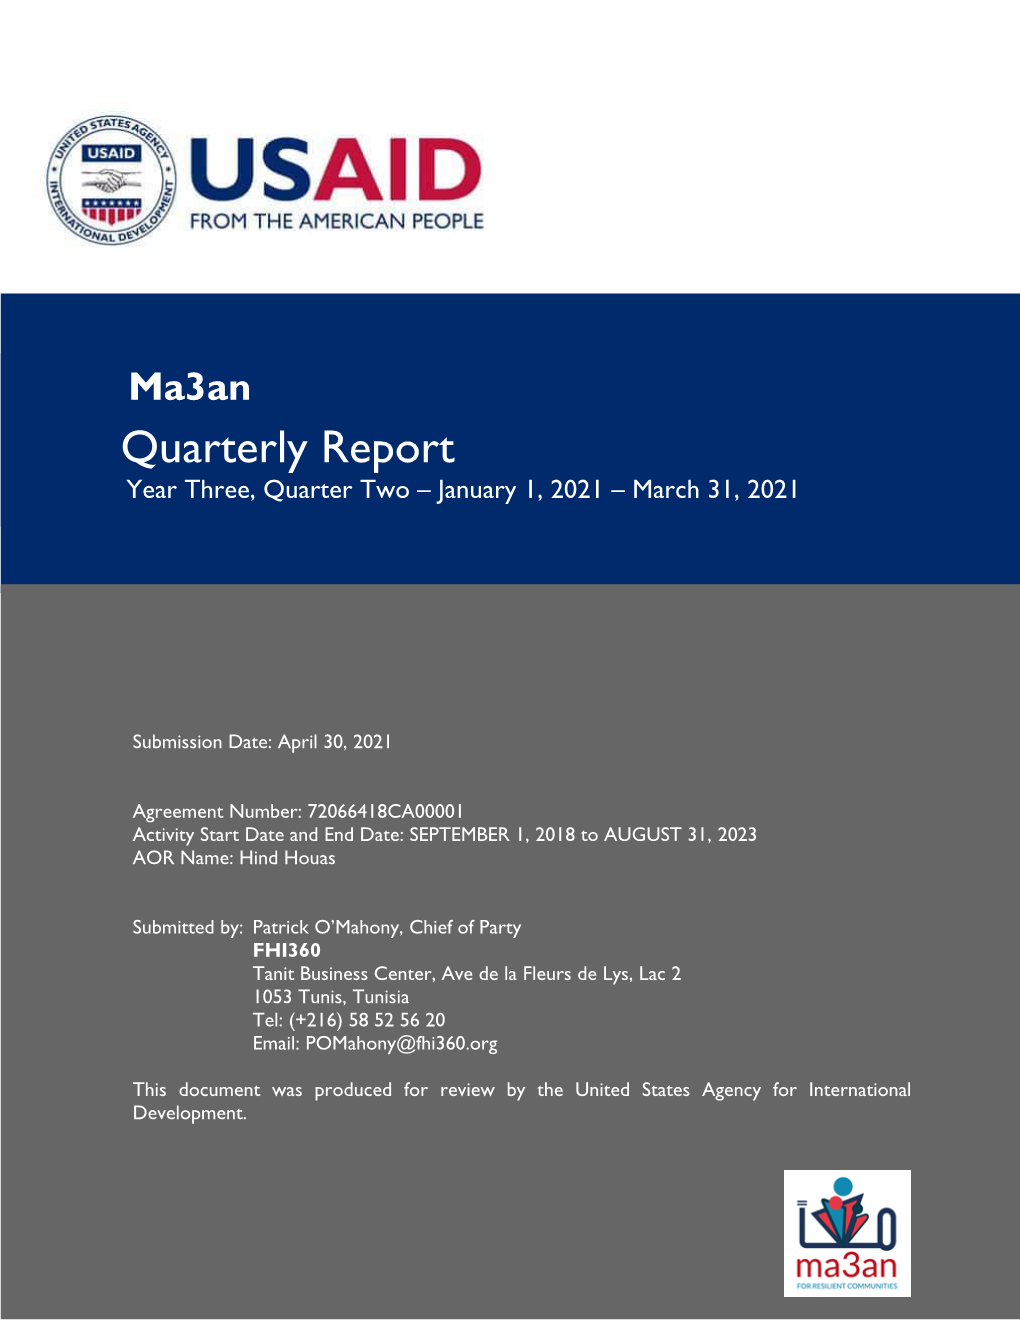 Quarterly Report Year Three, Quarter Two – January 1, 2021 – March 31, 2021